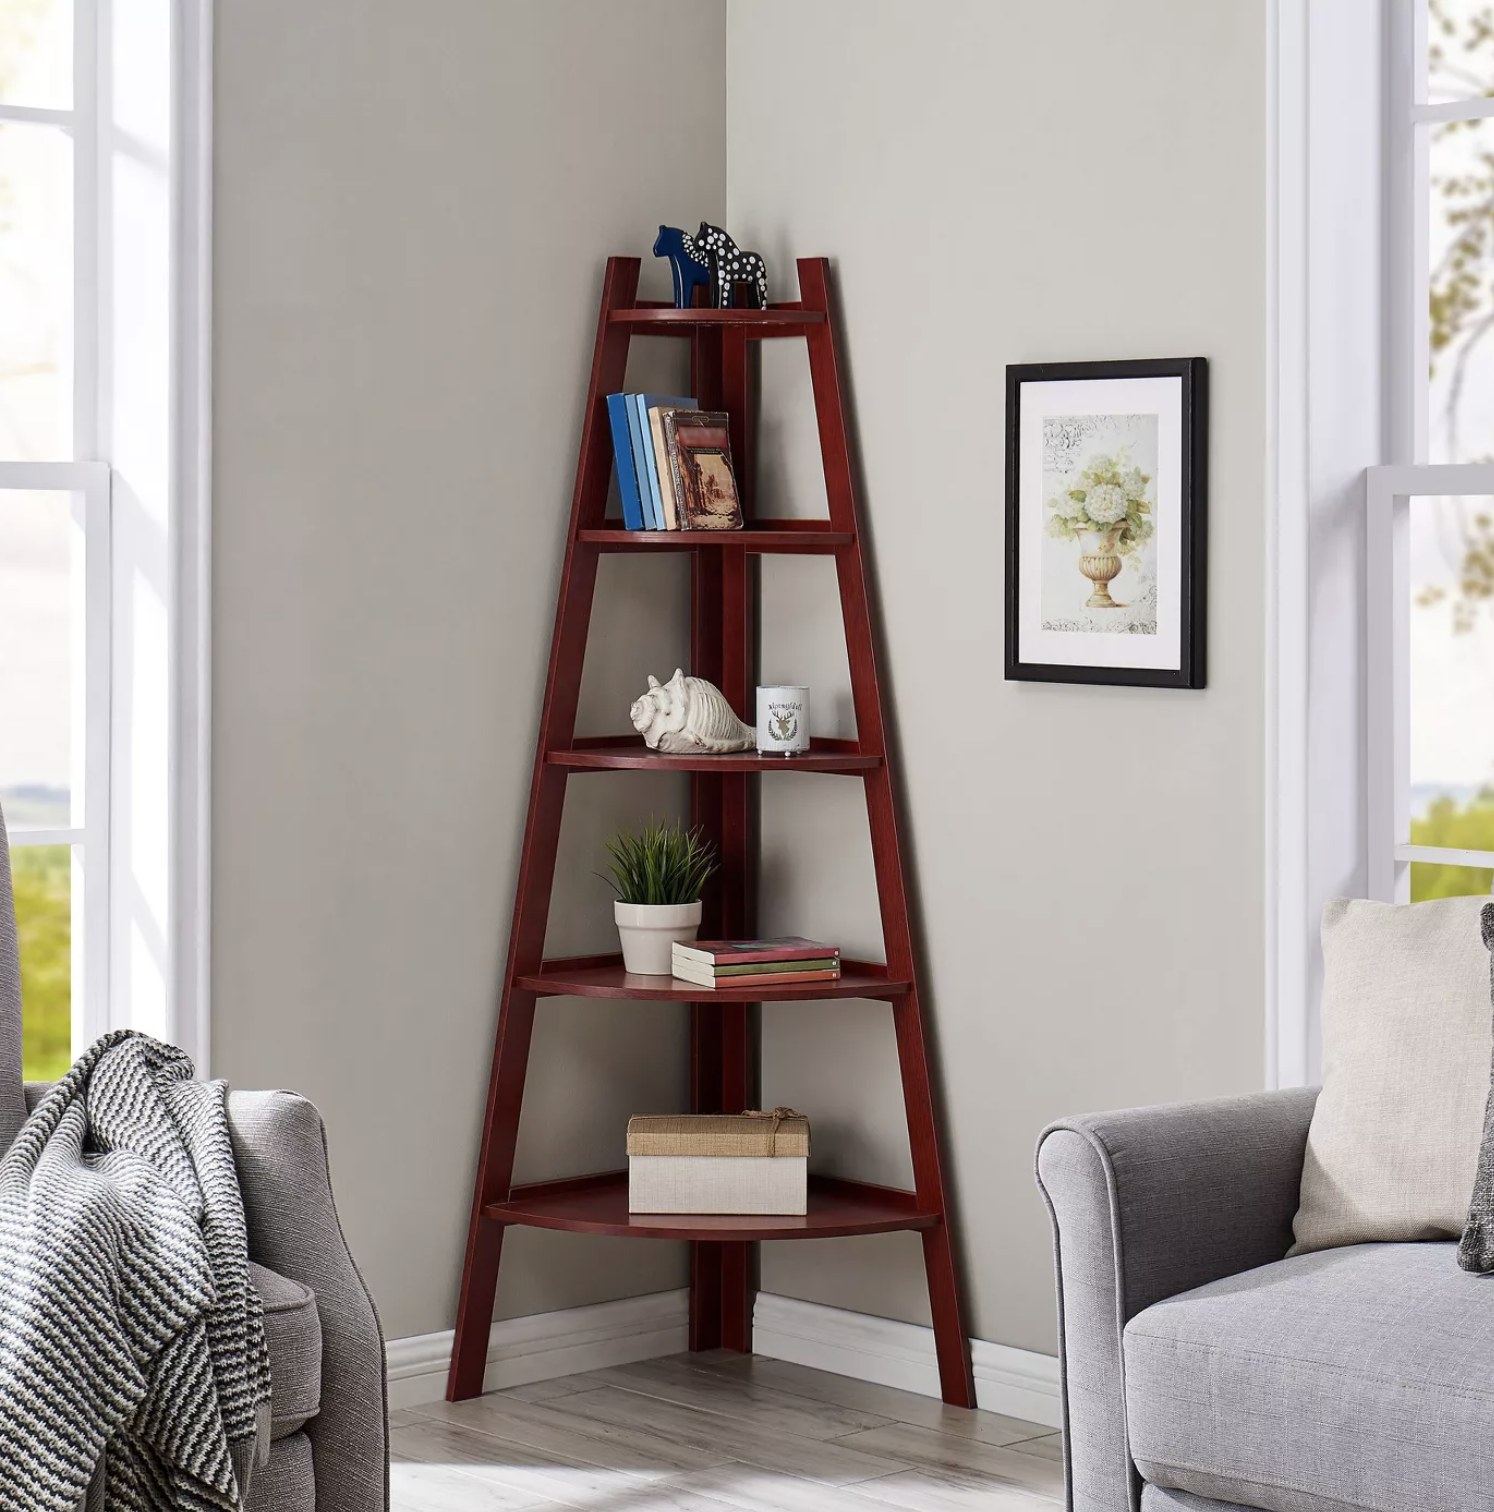 the red ladder bookshelf with decor and books on it